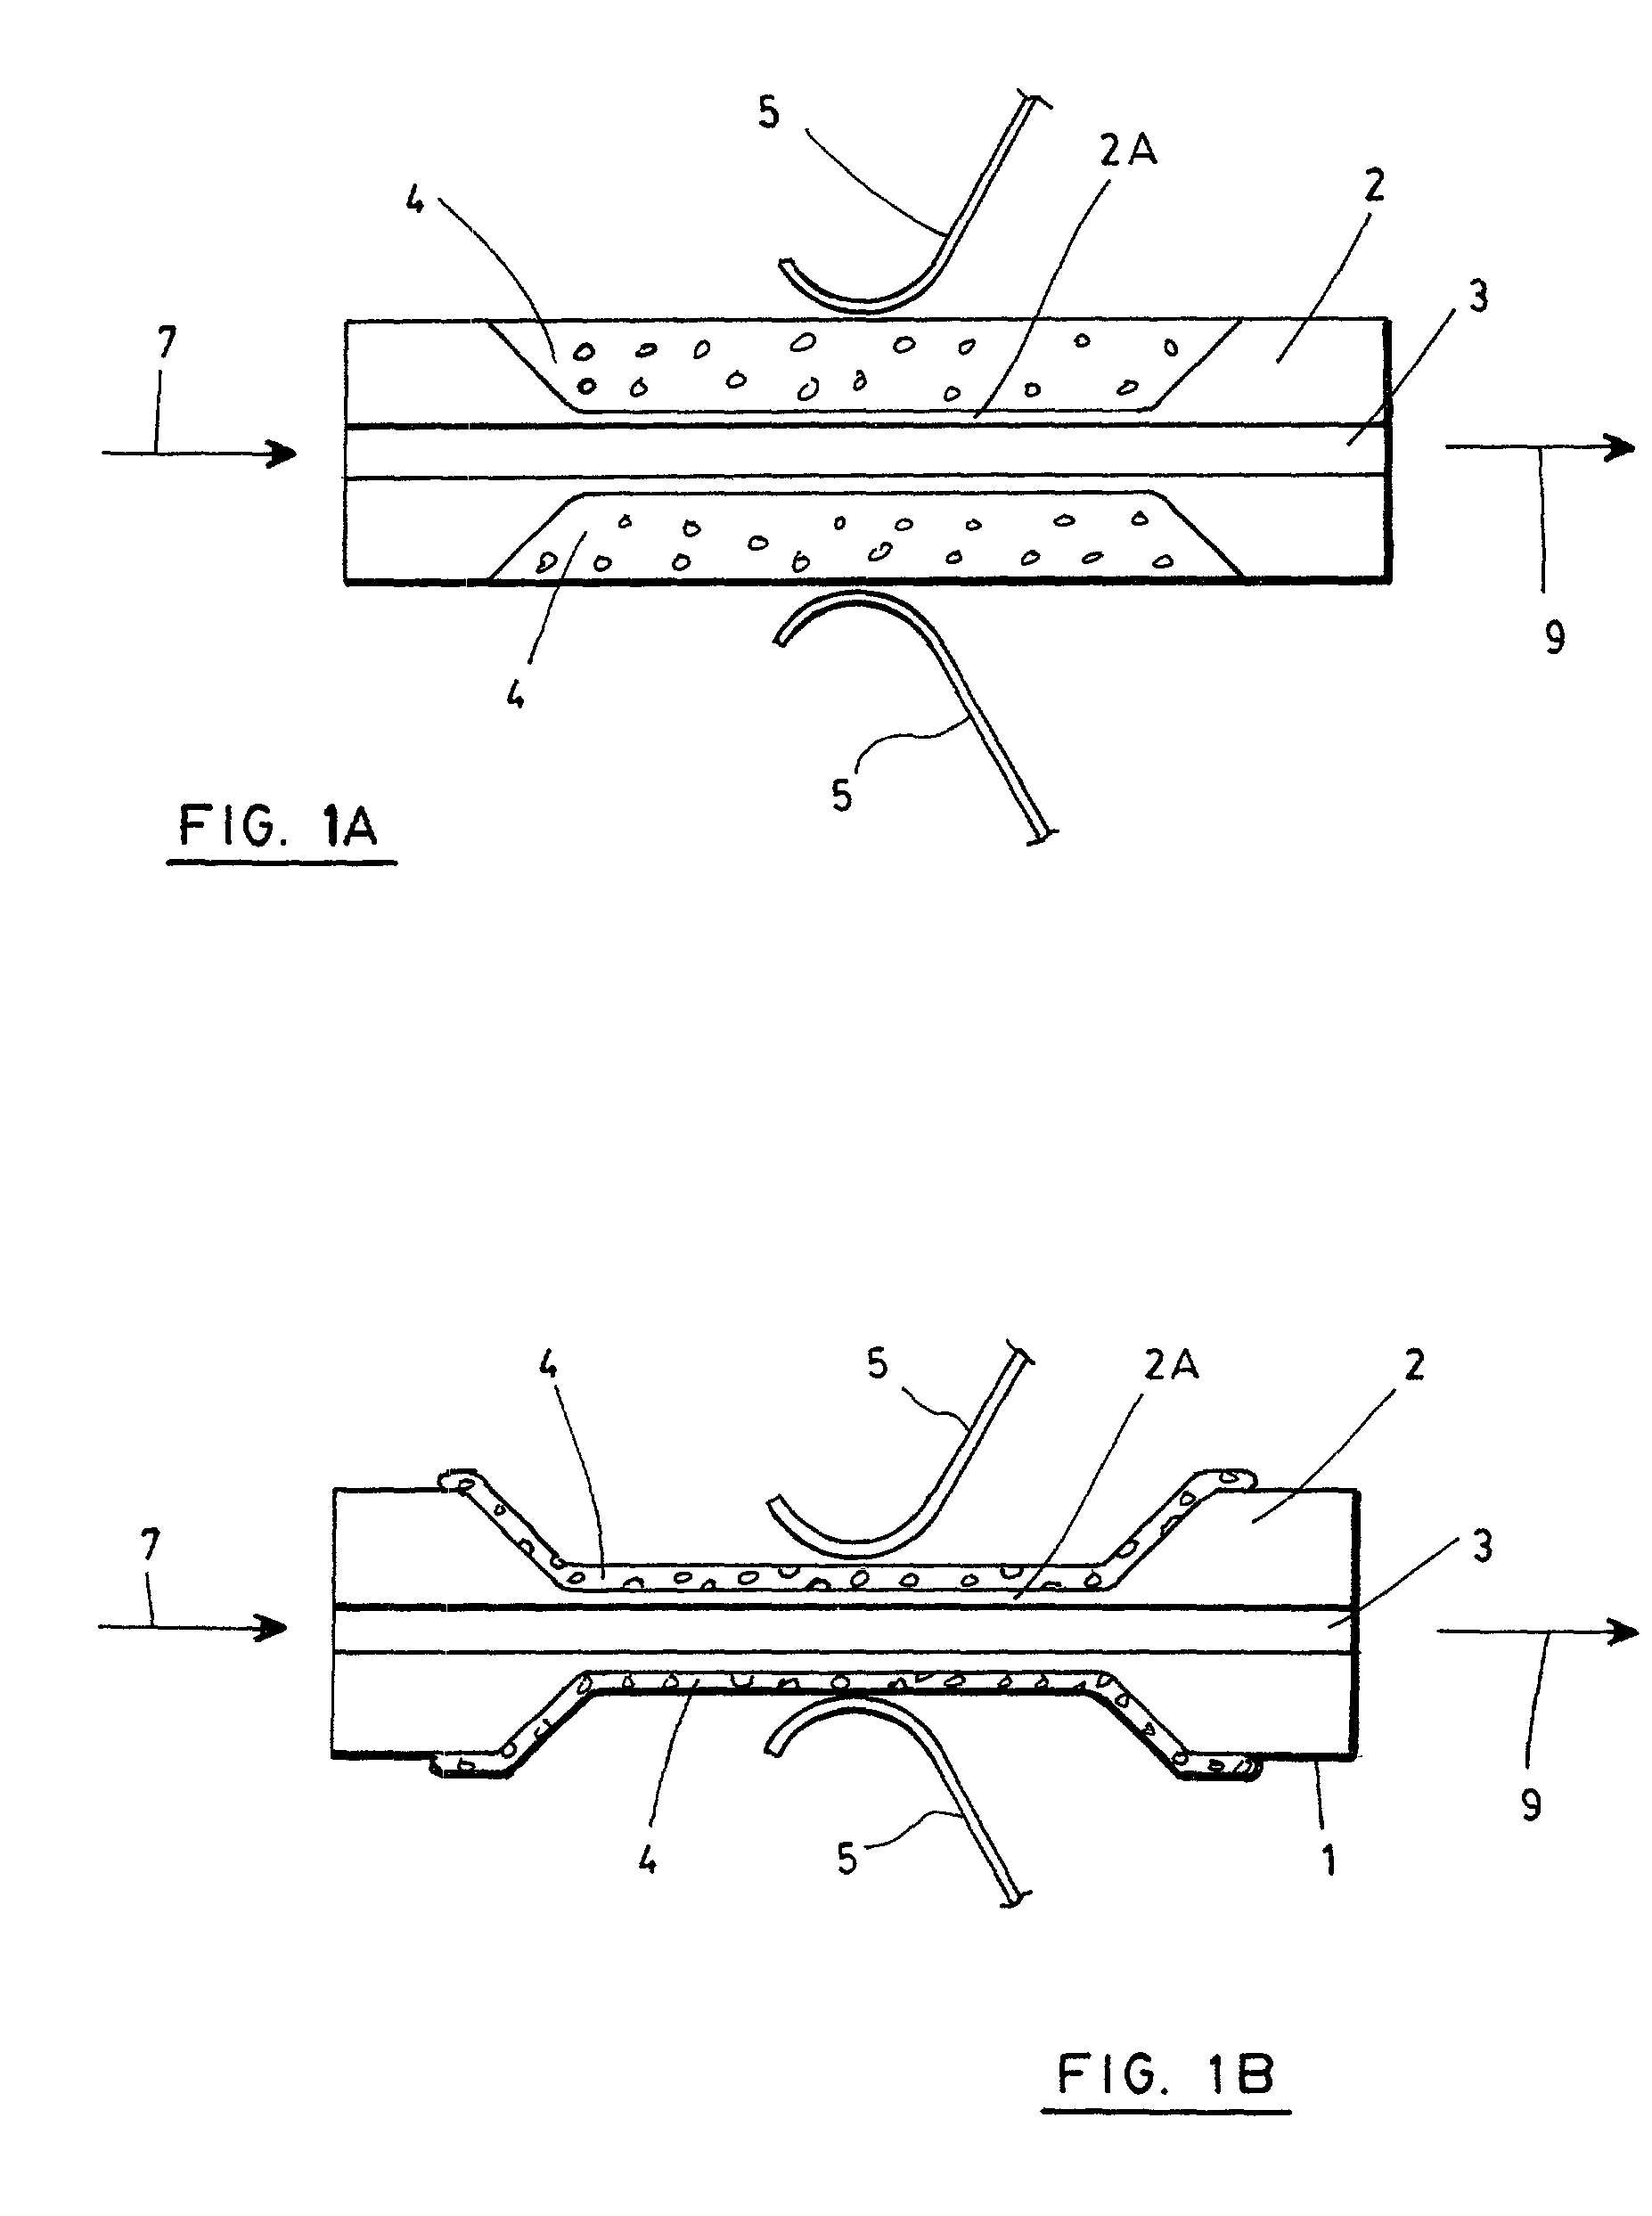 Microporous glass waveguides doped with selected materials